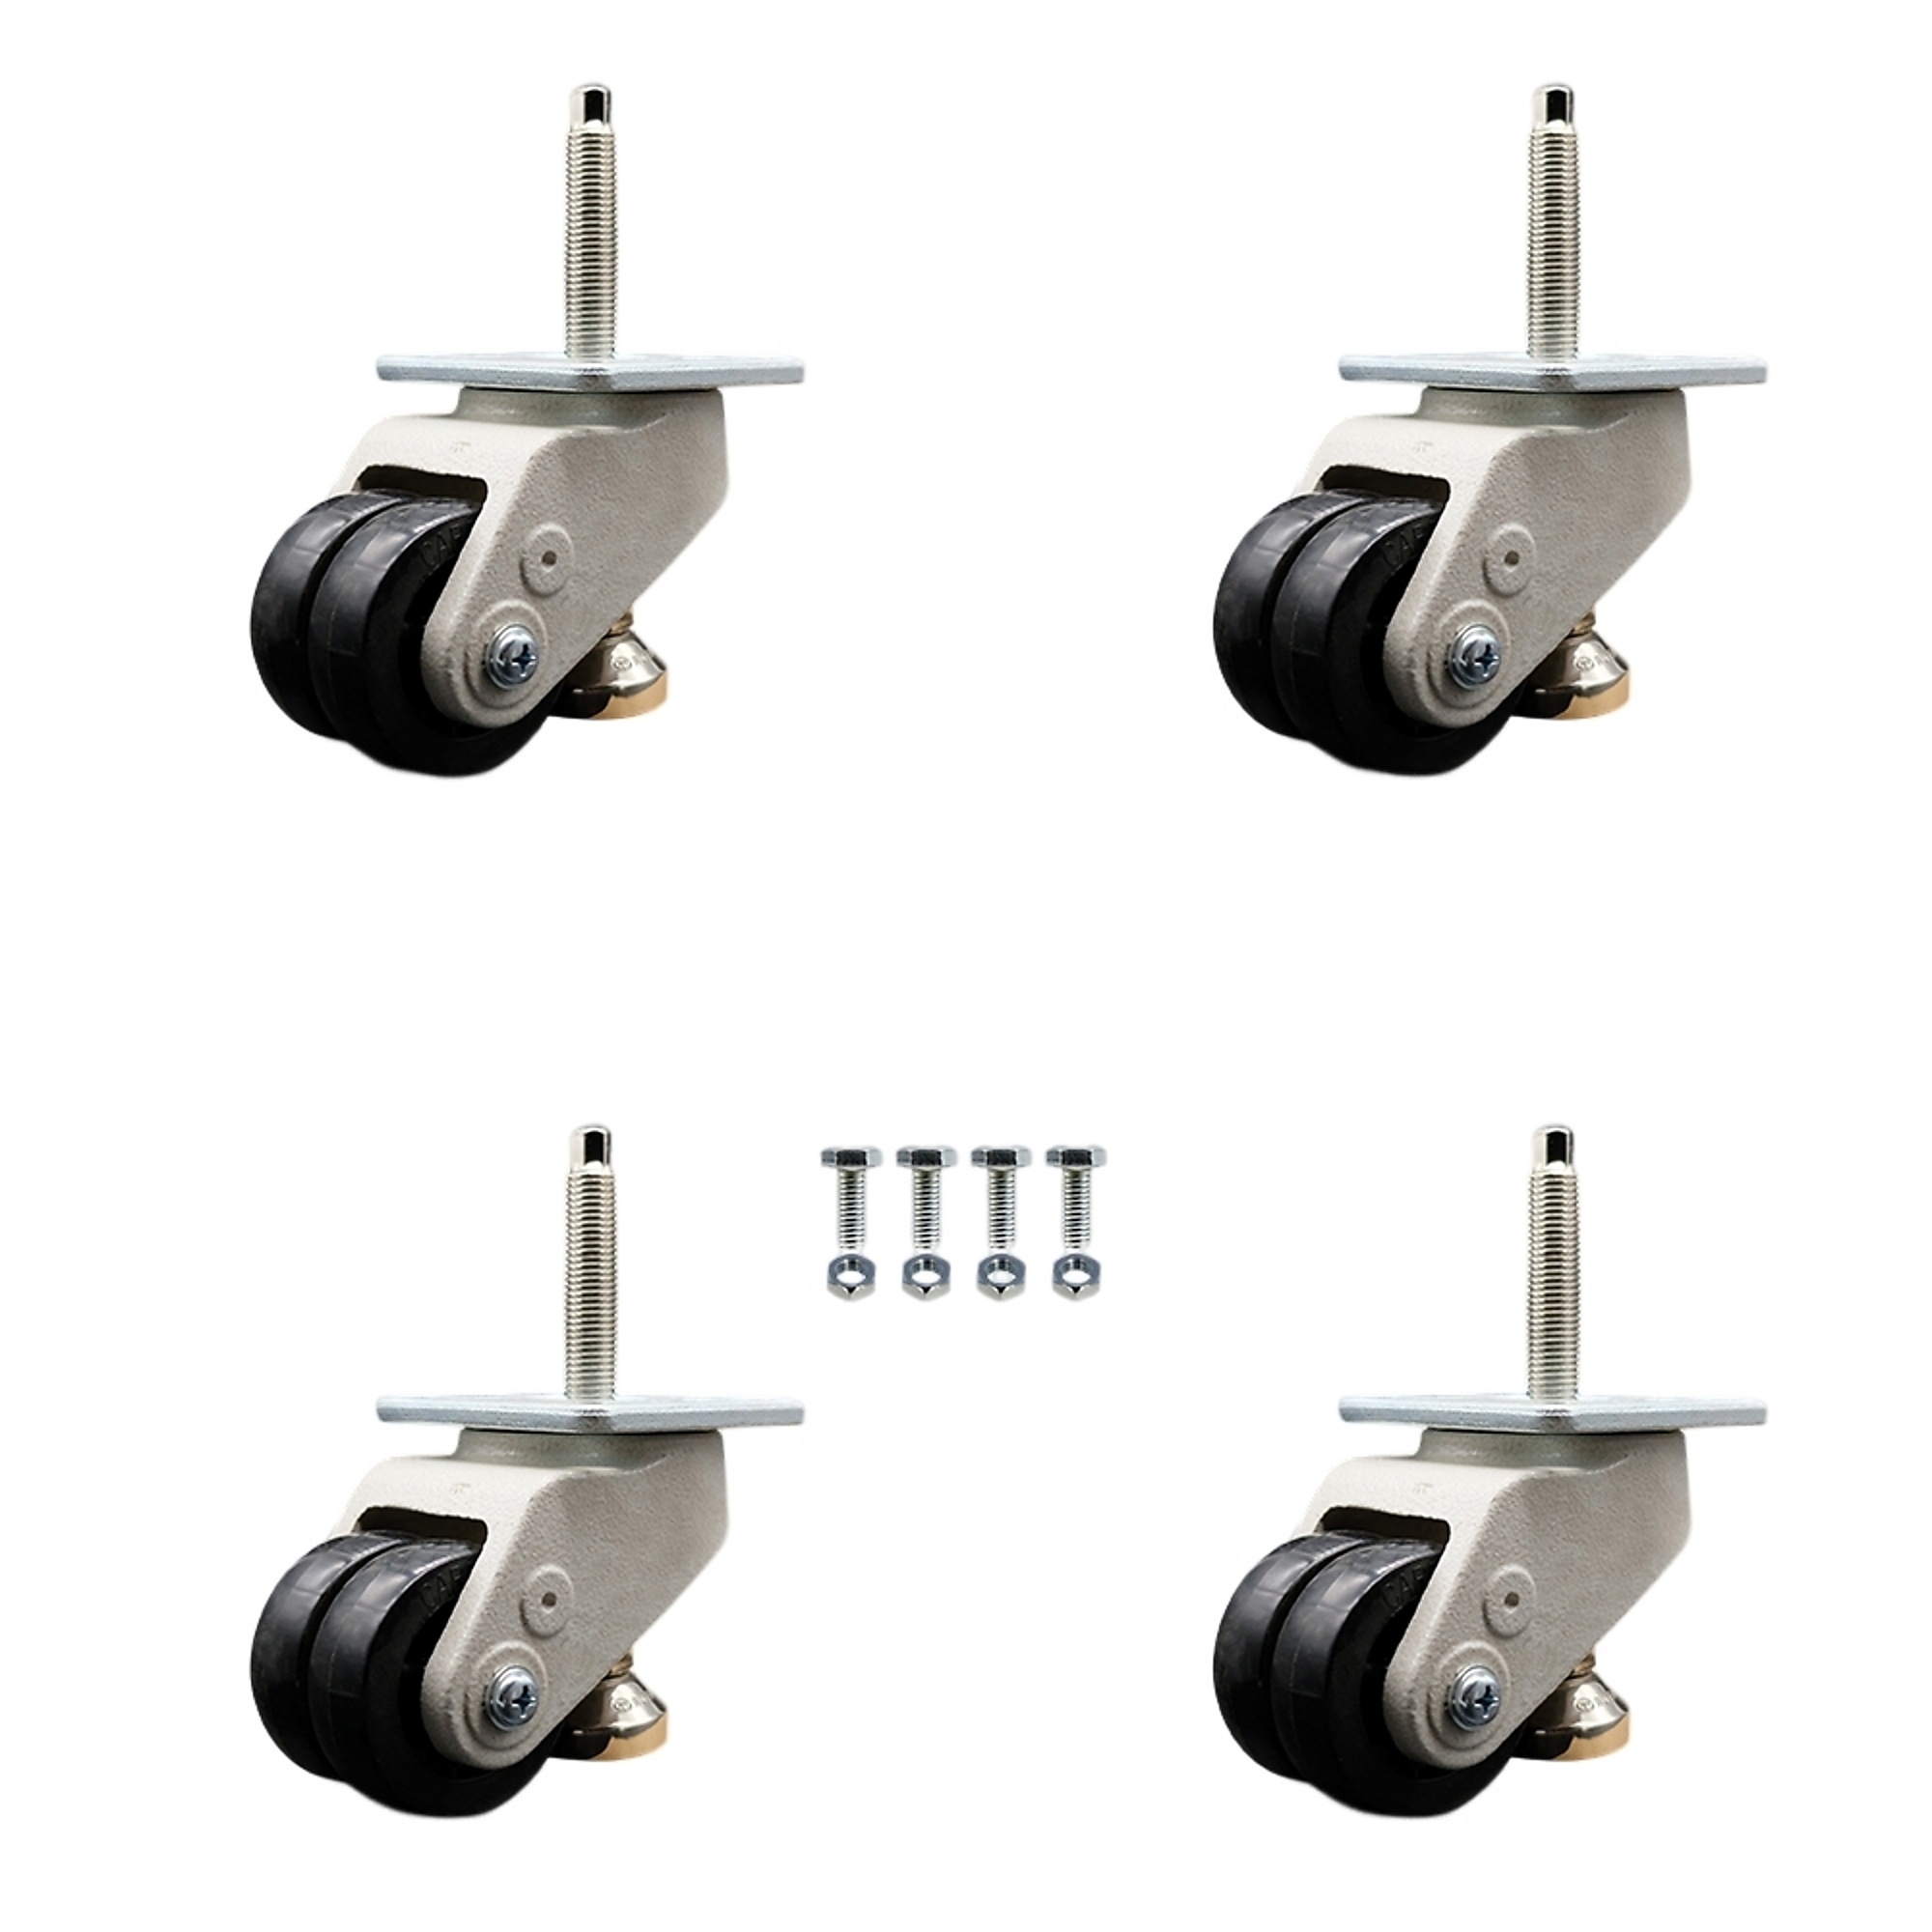 Service Caster, 2.8Inch Plate Casters, Wheel Diameter 2.8 in, Caster Type Swivel, Package (qty.) 4, Model SCC-TPLV30S72-NYR-1100-DC-4